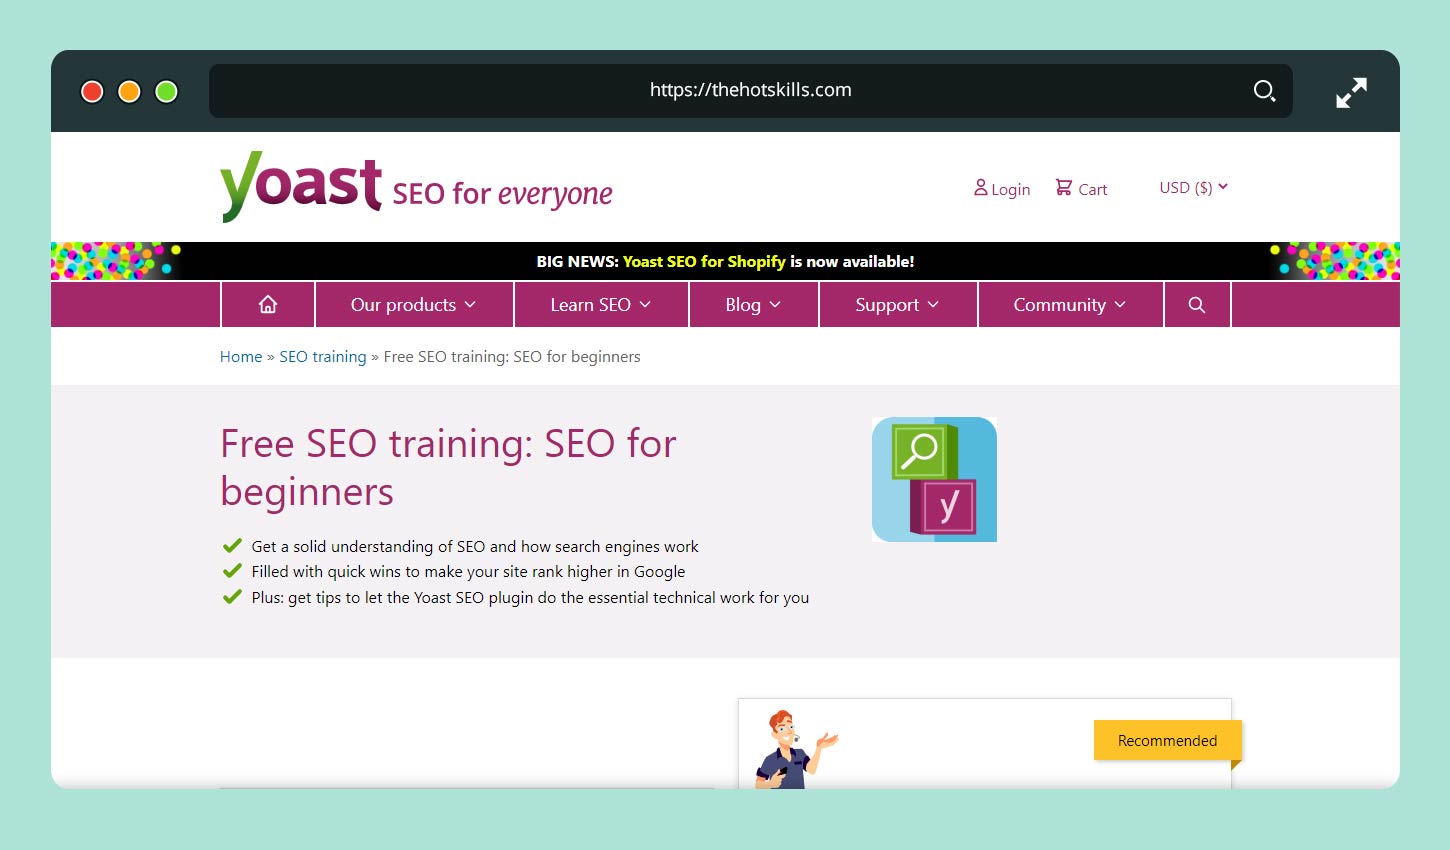 Free SEO training for beginners